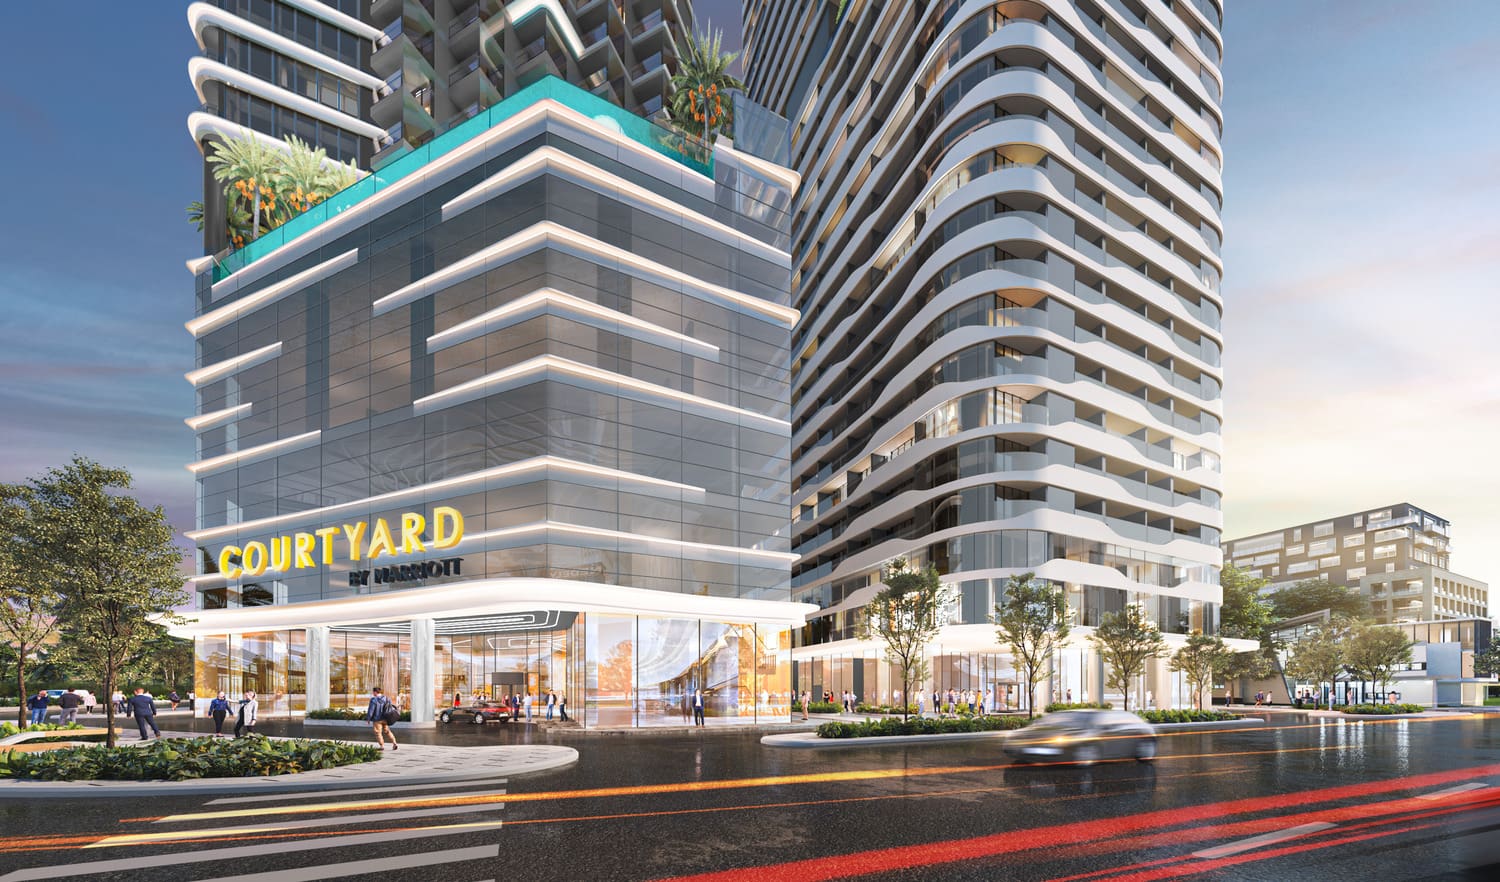 rendered image of front entrance of the Marriott and Centara street level